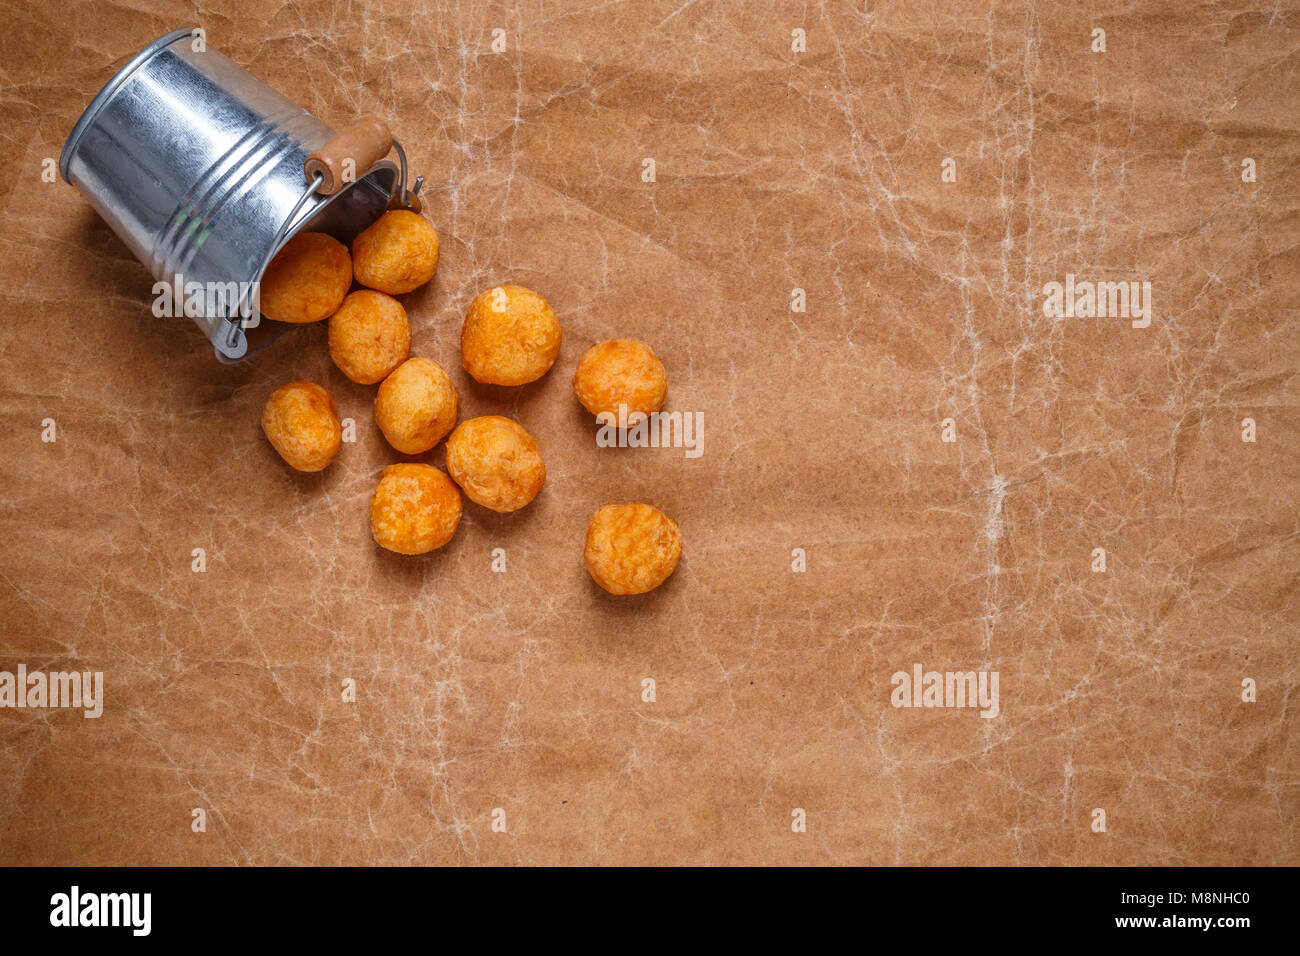 Top view deep fried sweet potato balls on crumpled brown paper background Stock Photo